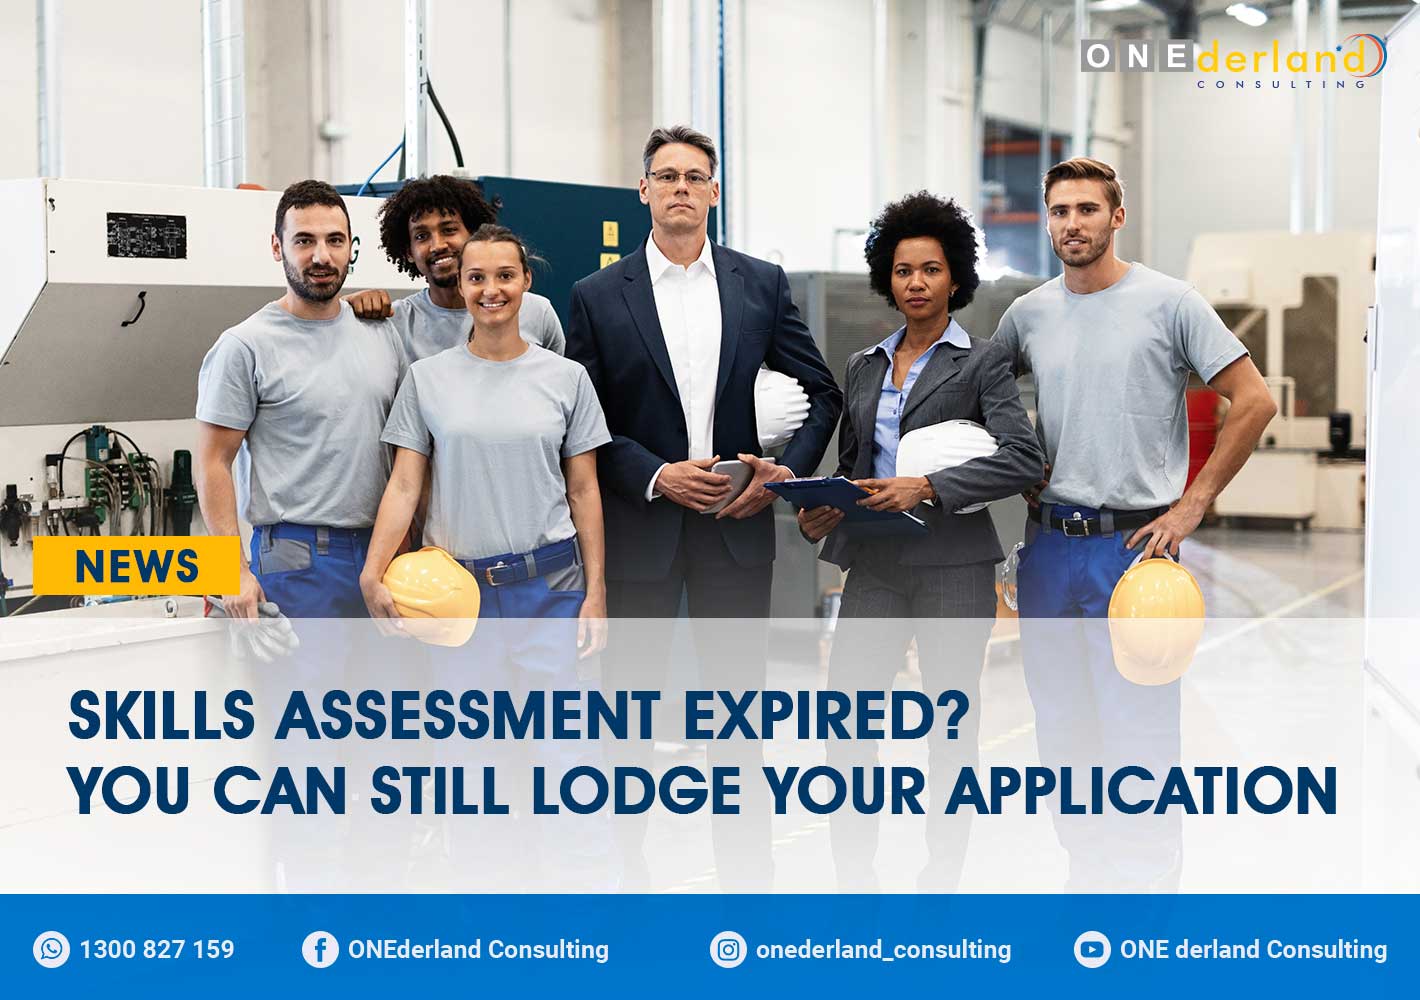 Skills Assessment Expired? Don’t Worry, You can Still Lodge a Valid Skilled Visa Application